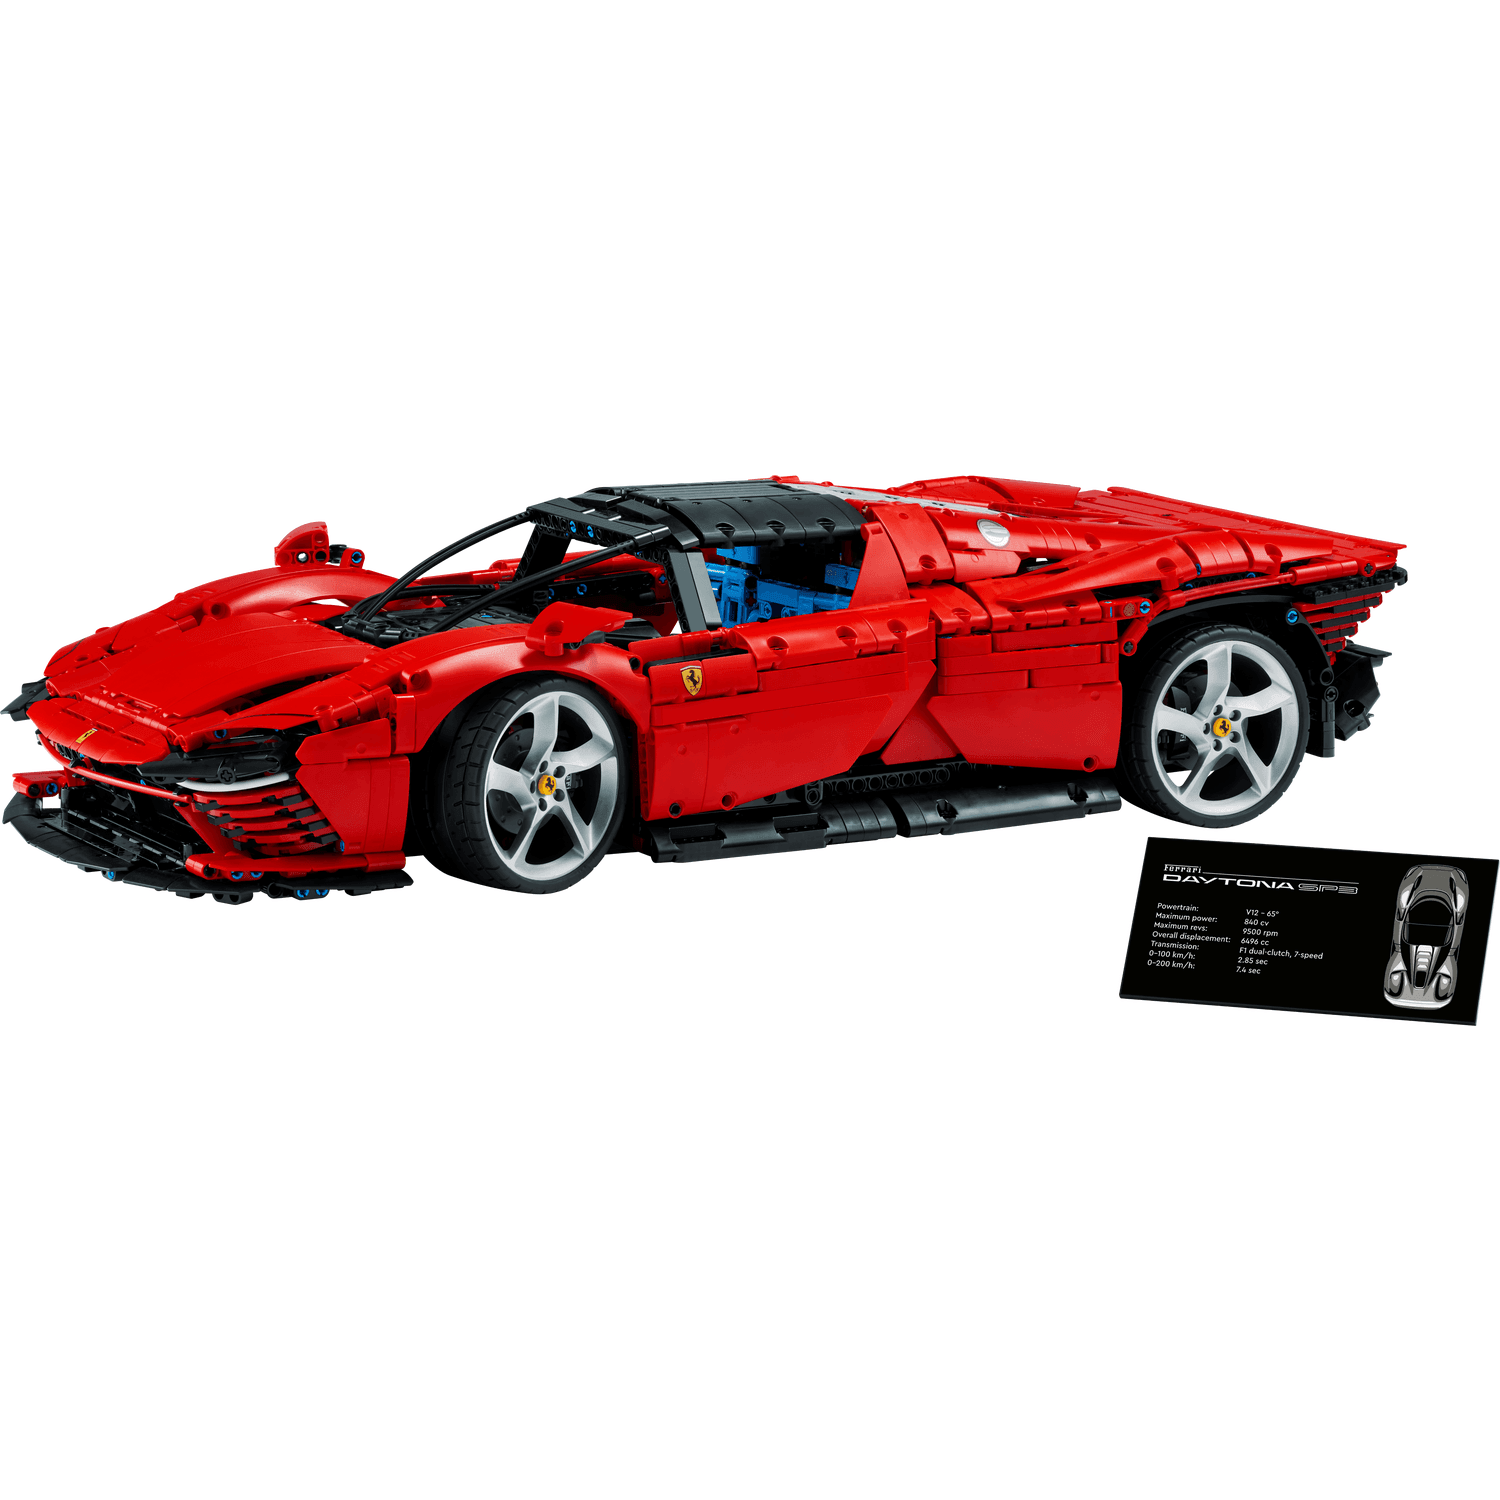 LEGO Technic 42143 Ferrari Daytona SP3 Building Project for Adults, Build 'N Display This Distinctive Model 3778 Pieces - BumbleToys - 8+ Years, 8-13 Years, Boys, Cars, Ferrari, LEGO, OXE, Pre-Order, Speed Champions